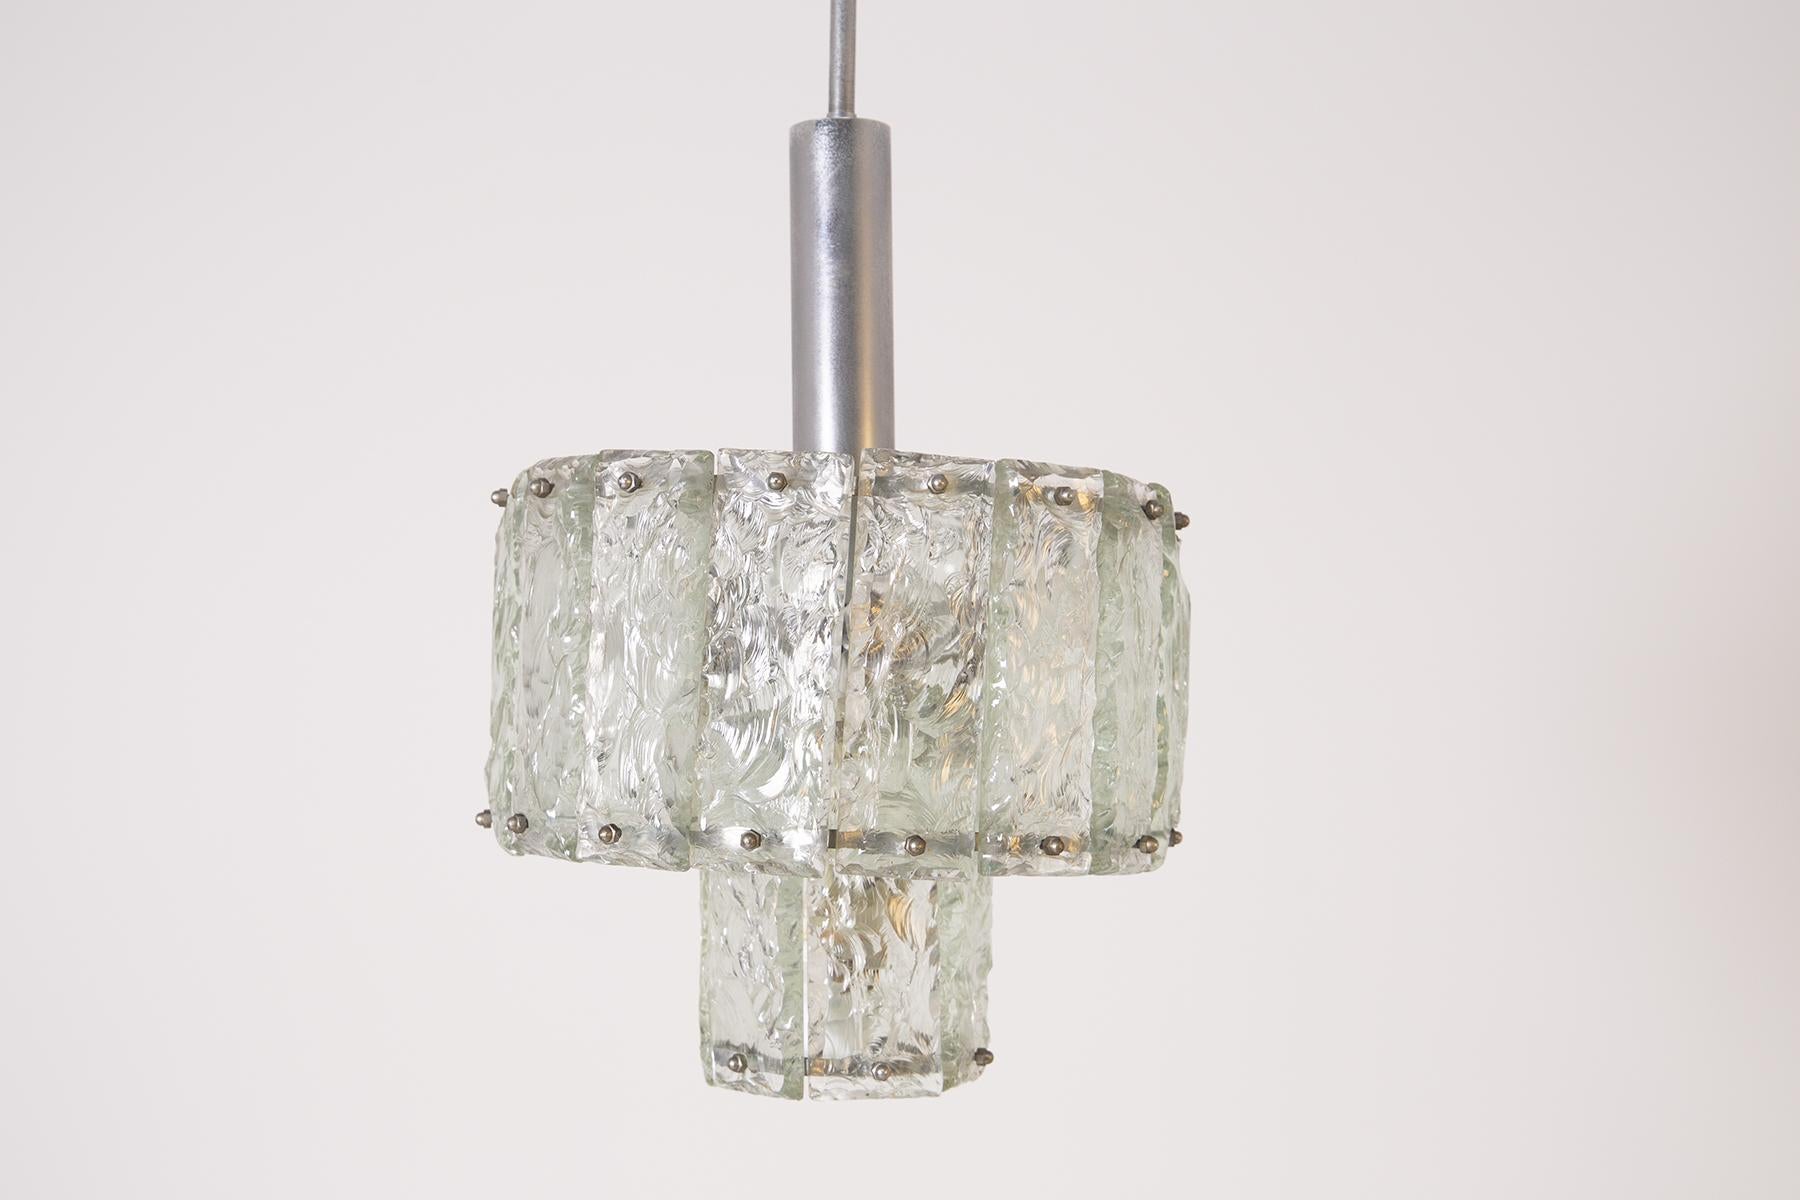 Long Italian pendant chandelier from 1960. The chandelier has a nickel-plated brass frame. Its shade is composed of several pieces of hand-hammered glass. The lampshade is composed of a first smaller sequence of hammered glass inside the lamp and a